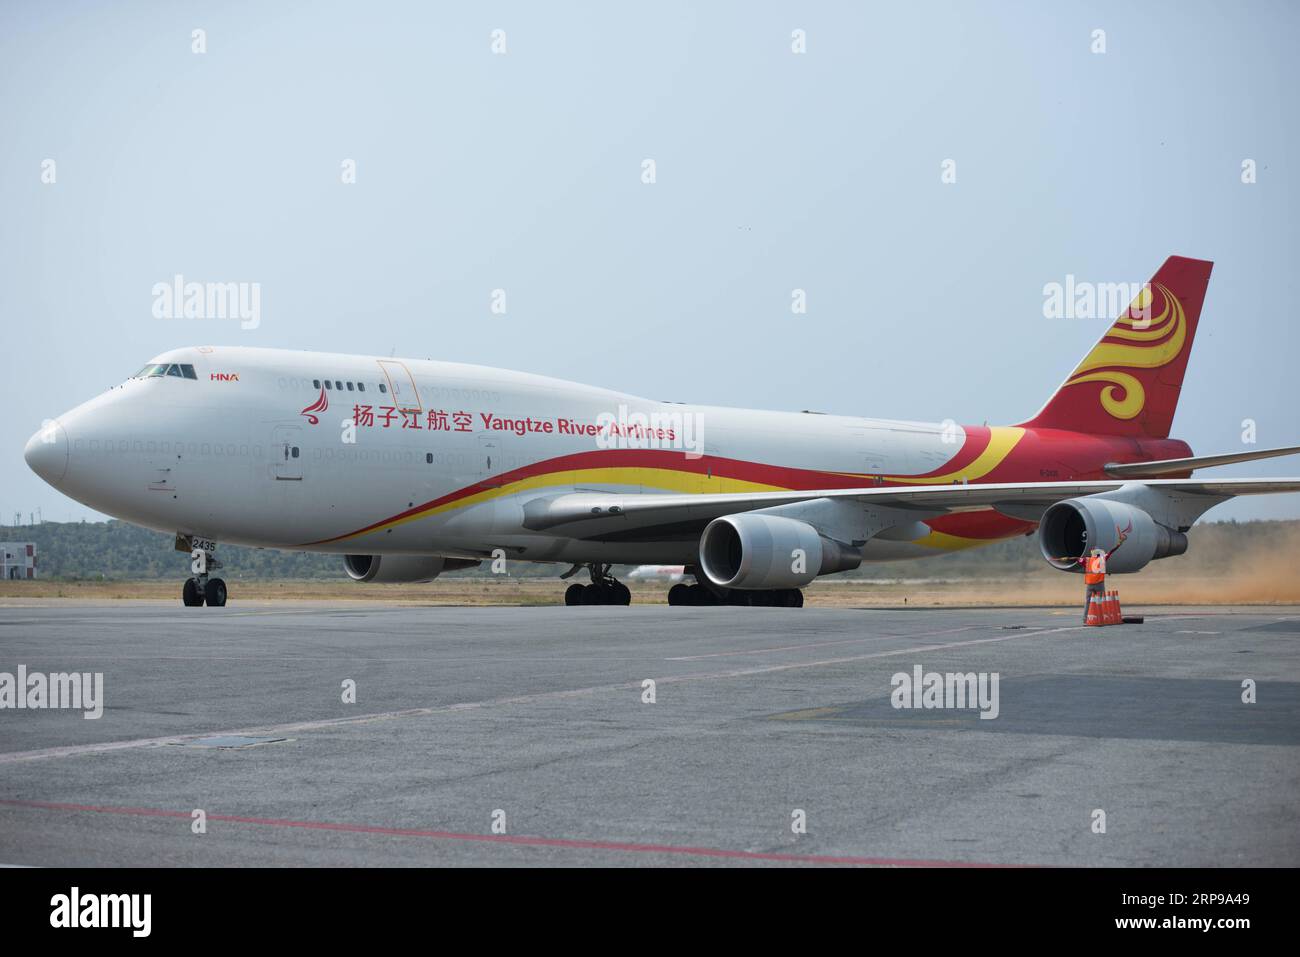 (190330) -- CARACAS, March 30, 2019 -- The plane loaded with Chinese aids arrives at the Simon Bolivar International Airport in Maiquetia in the state of Vargas, Venezuela, on March 29, 2019. The Venezuelan government received on Friday medical aid from China. ) VENEZUELA-CARACAS-CHINA-MEDICAL AID MarcosxSalgado PUBLICATIONxNOTxINxCHN Stock Photo